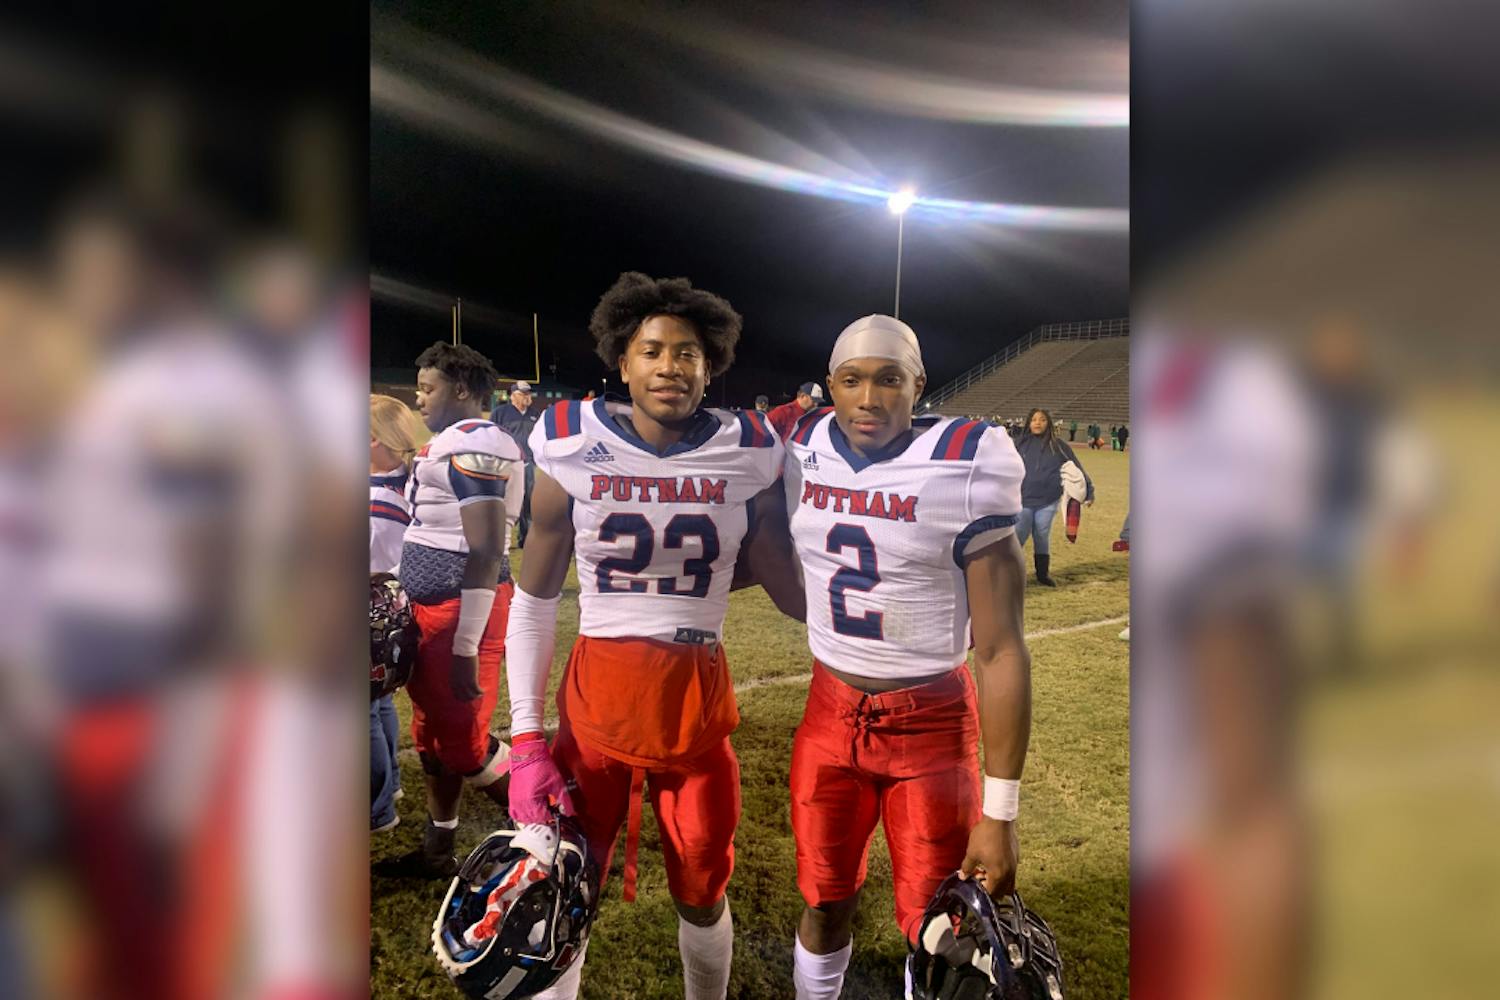 Jalon and Gerald Kilgore compete for Putnam County High School against the Fitzgerald High School College and Career Academy in the third round of the Georgia 2A playoffs on Nov. 26, 2021. The brothers were recently reunited at the University of South Carolina after playing apart for two years. 